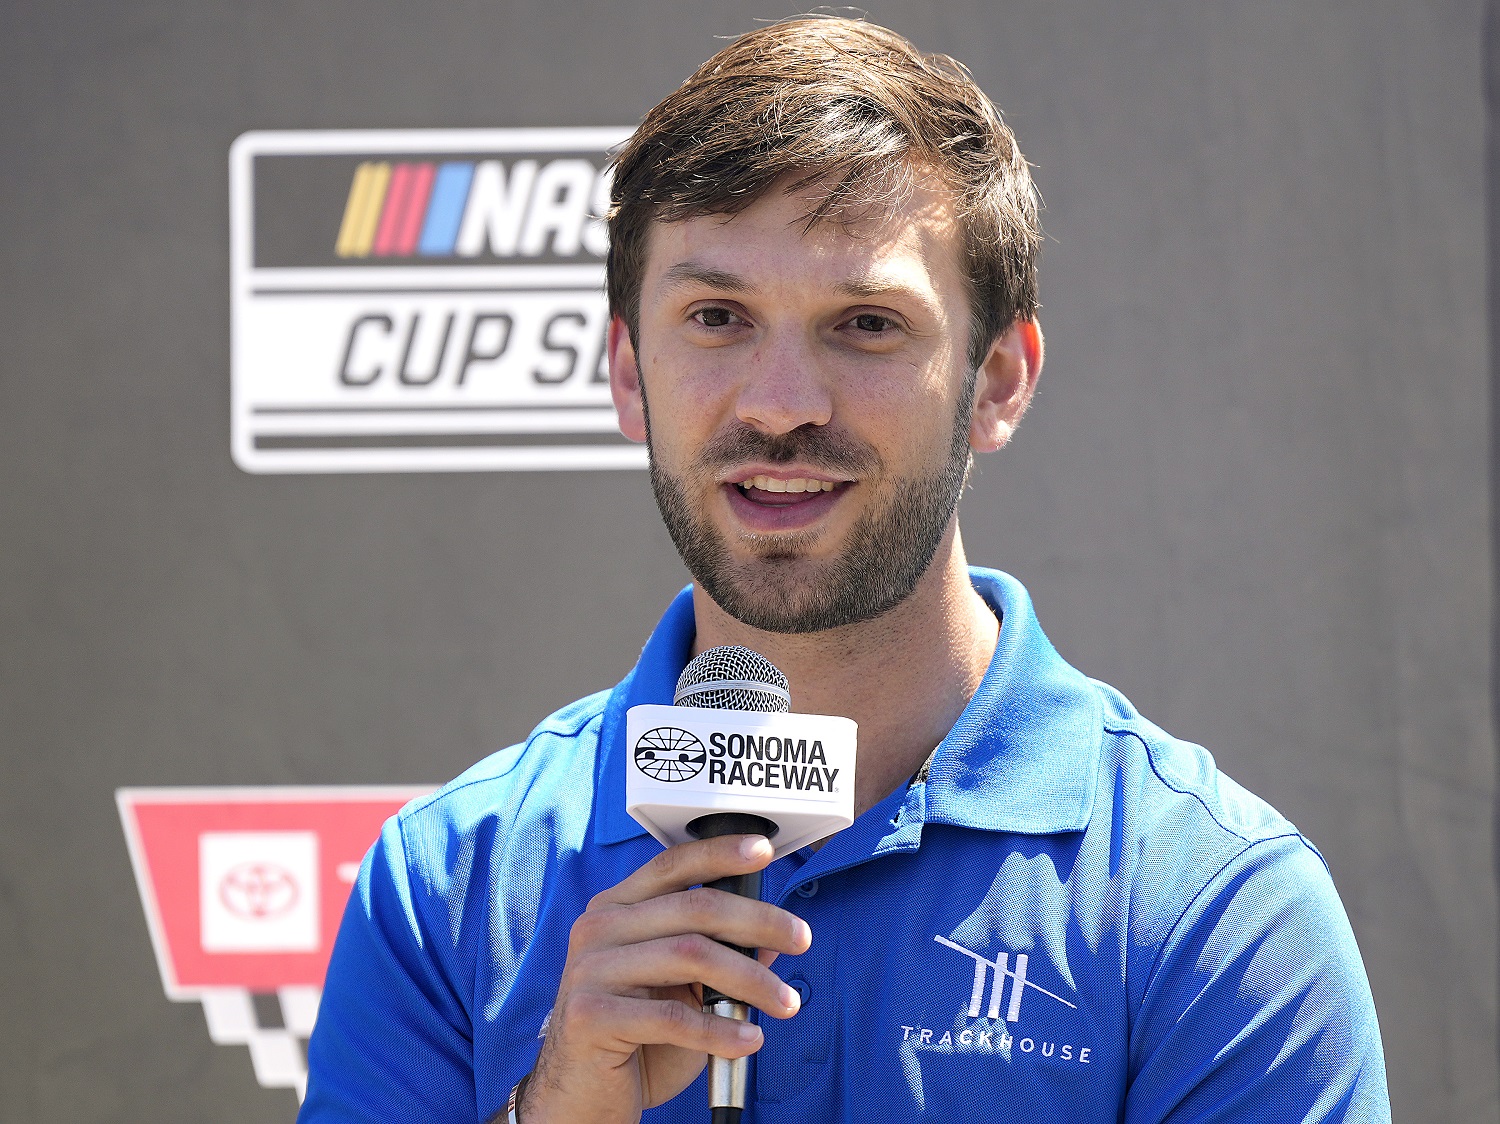 NASCAR driver Daniel Suarez speaks to the media during a press conference on June 9, 2022, in San Francisco, California. |  Thearon W. Henderson/Getty Images